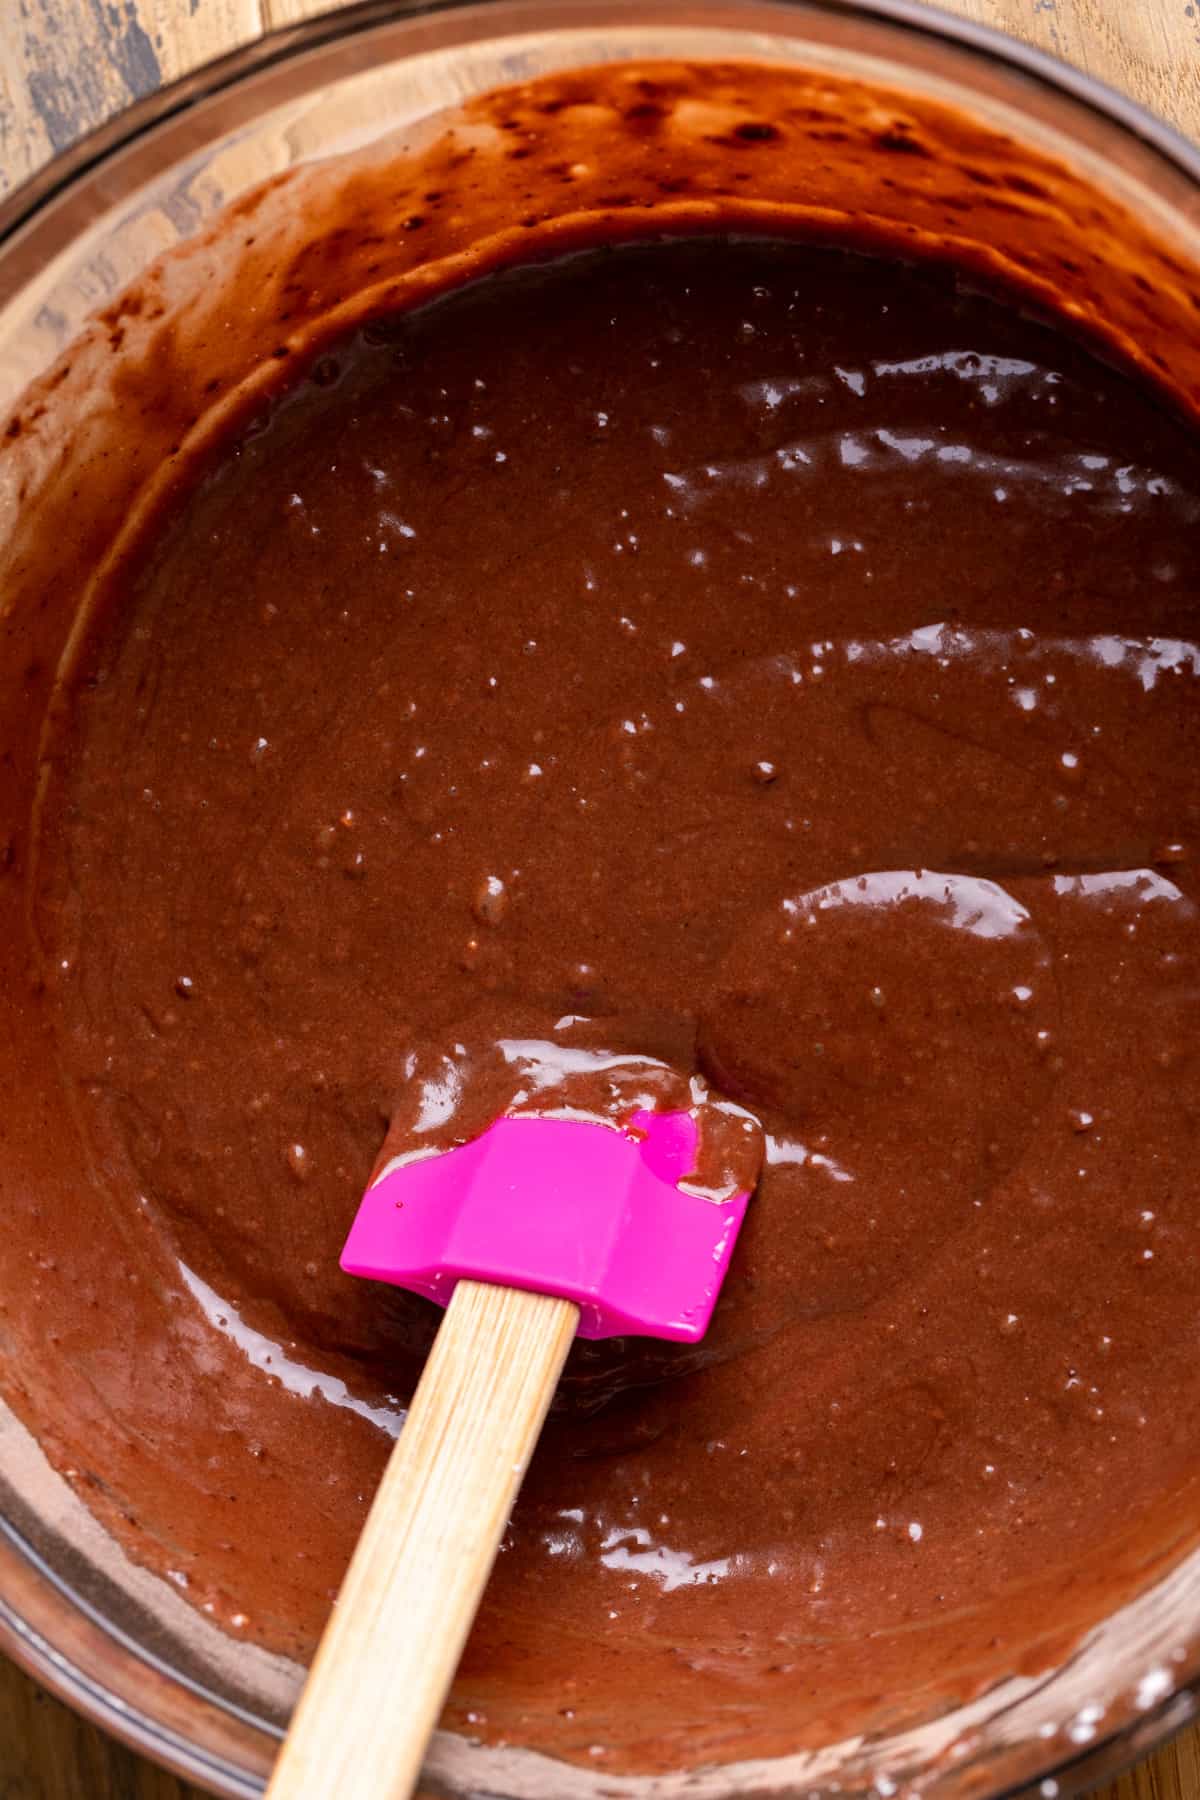 Chocolate cake batter in a glass bowl.